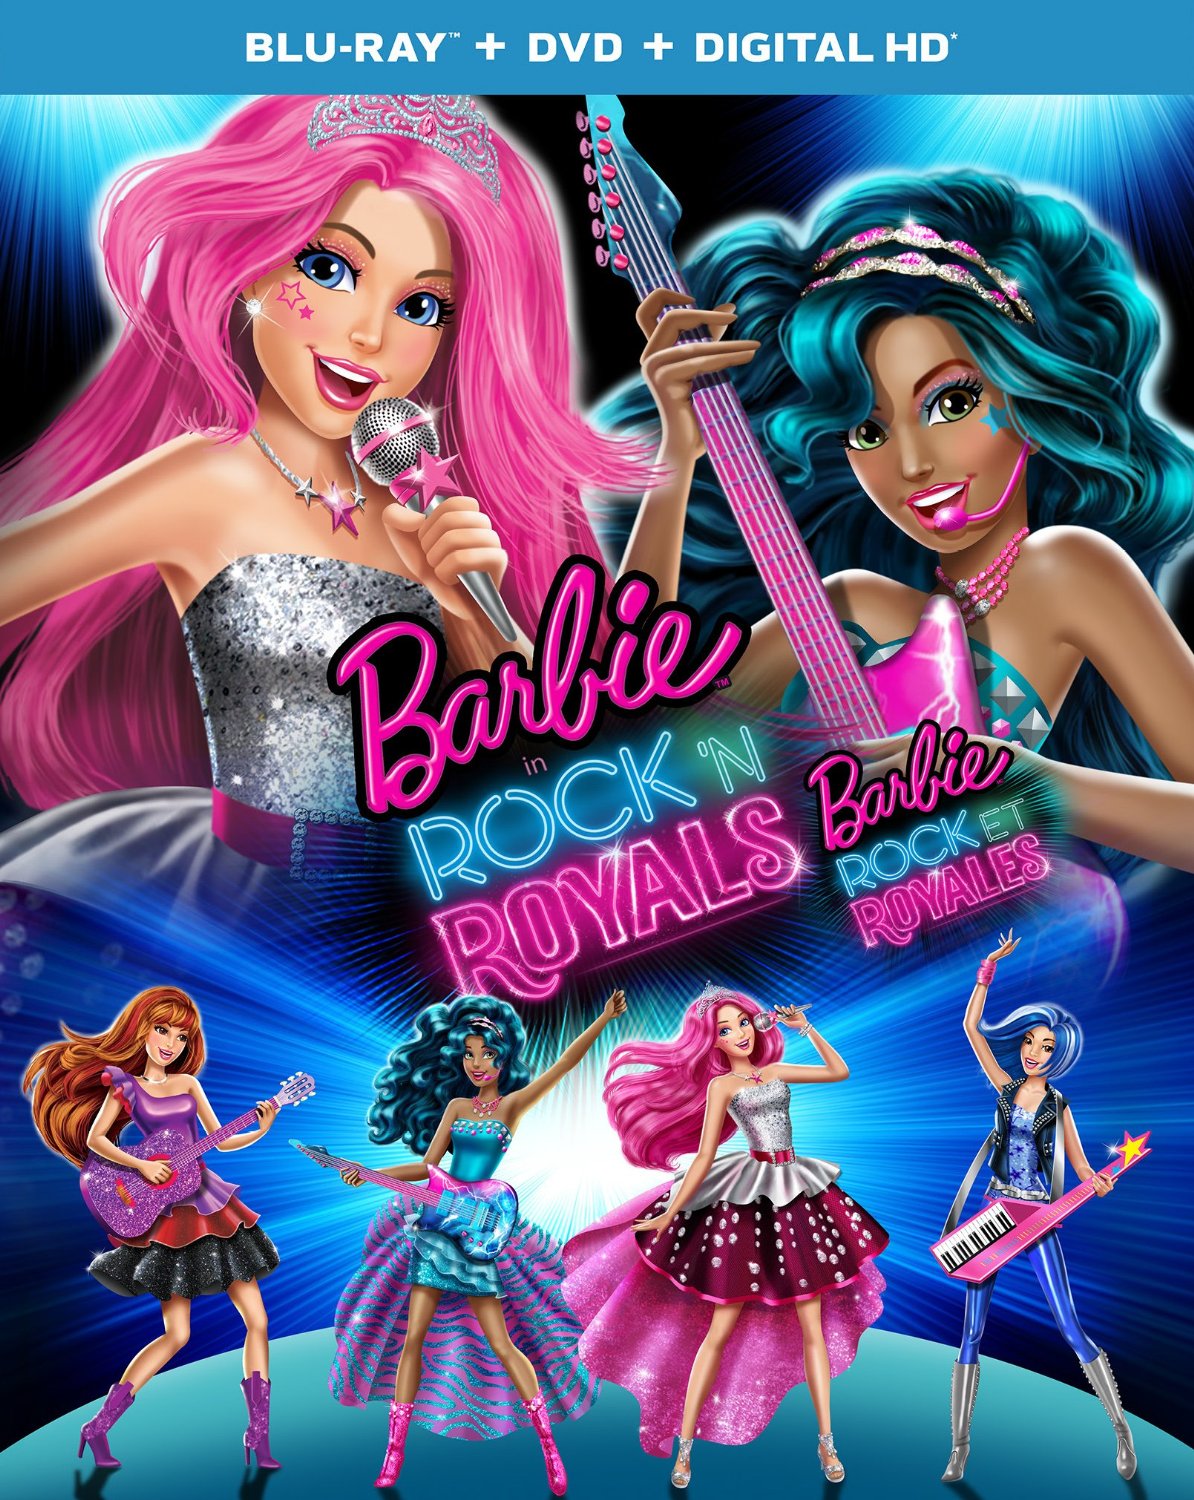 Barbie in Rock ‘n Royals – Blu-ray/DVD Combo Edition